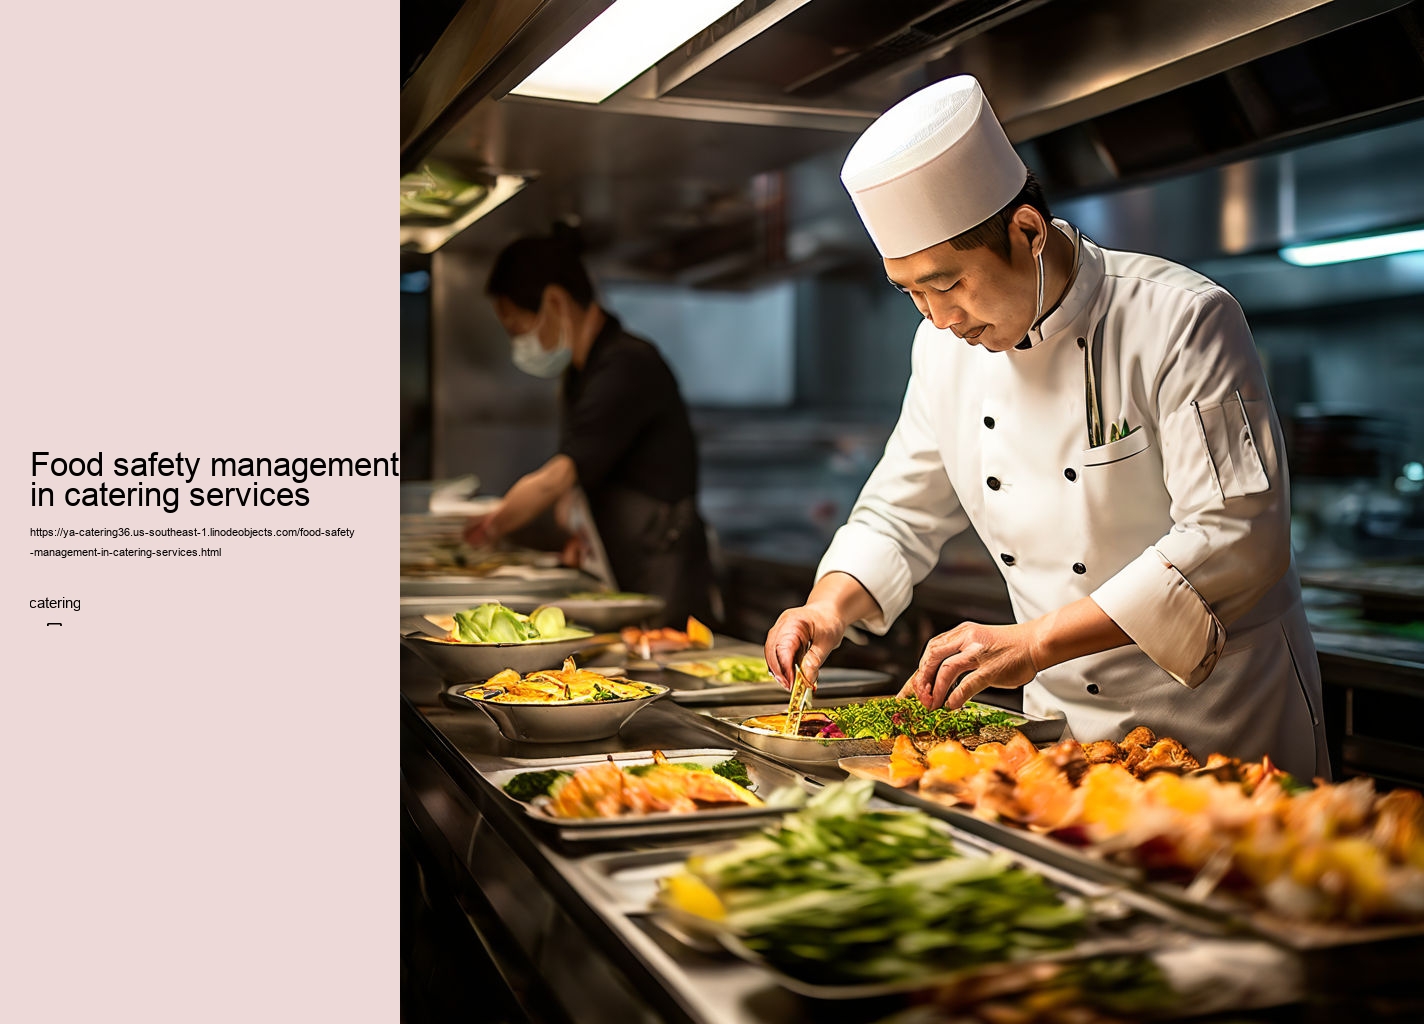 Food safety management in catering services